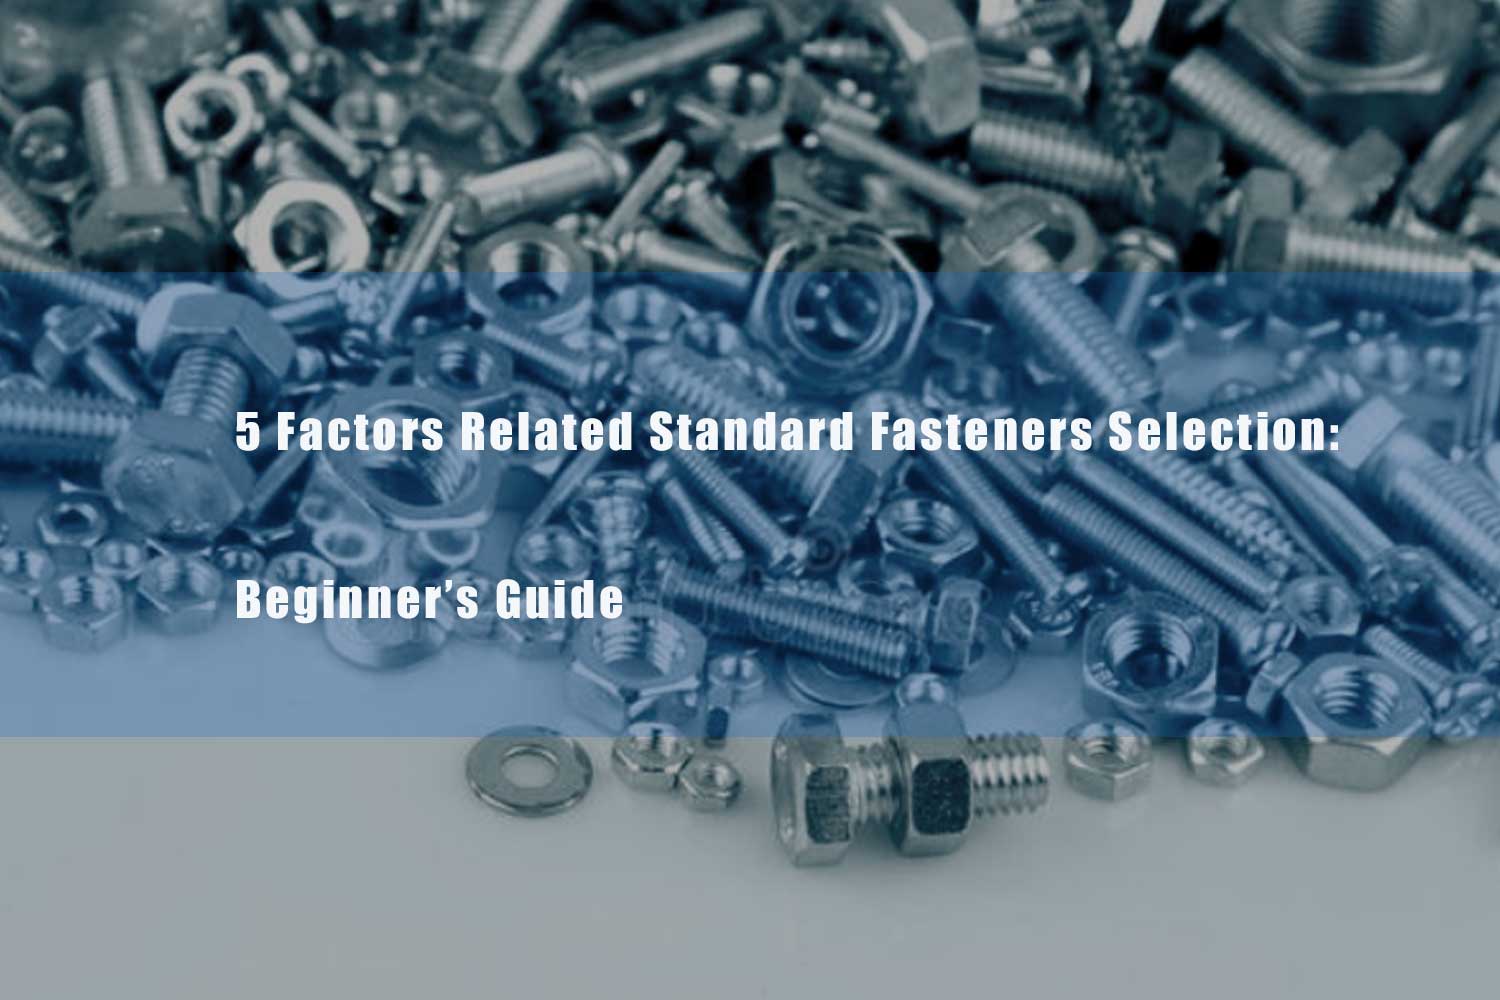 5 factors related standard fasteners selection